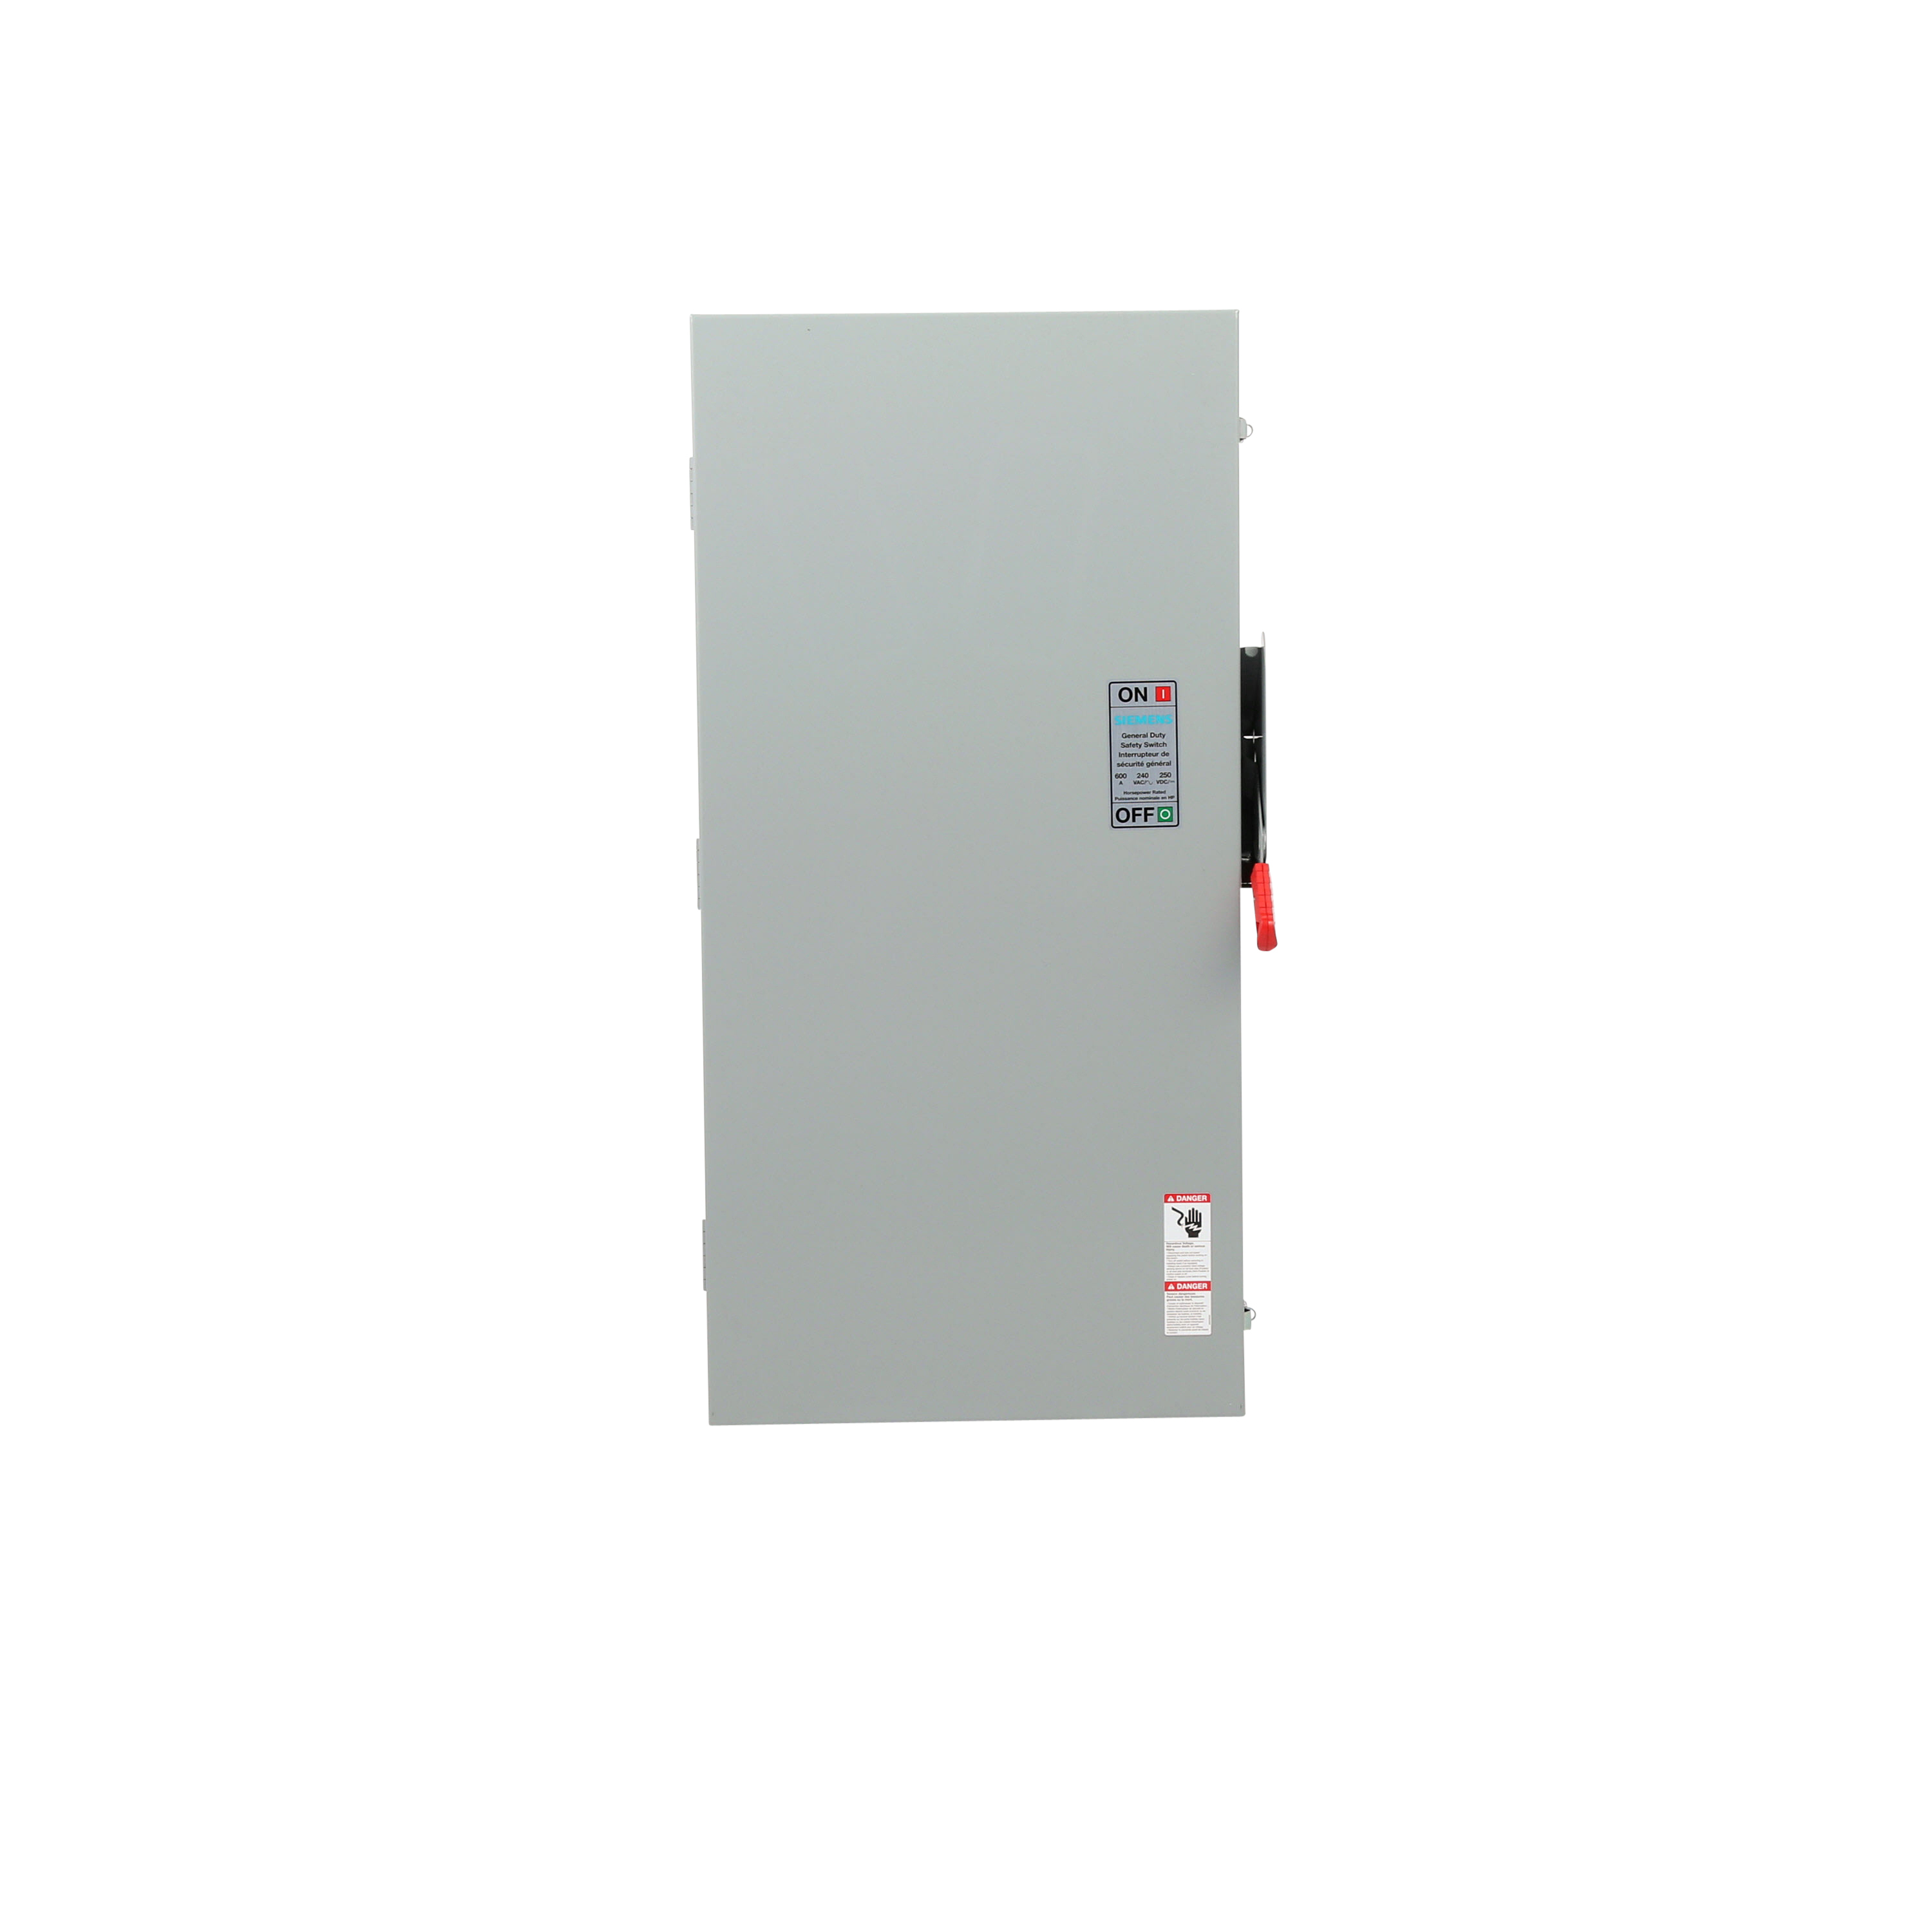 Siemens Low Voltage Circuit Protection General Duty Safety Switch. 3-Pole 3-Fuse and solid neutral Fused in a type 1 enclosure (indoor). Rated 240VAC (600A). Horse power (Std, Time delay) fused 1-PH 2-W (15, - ), 3-PH 3-W (75, 200). Special features service entrance labeled .